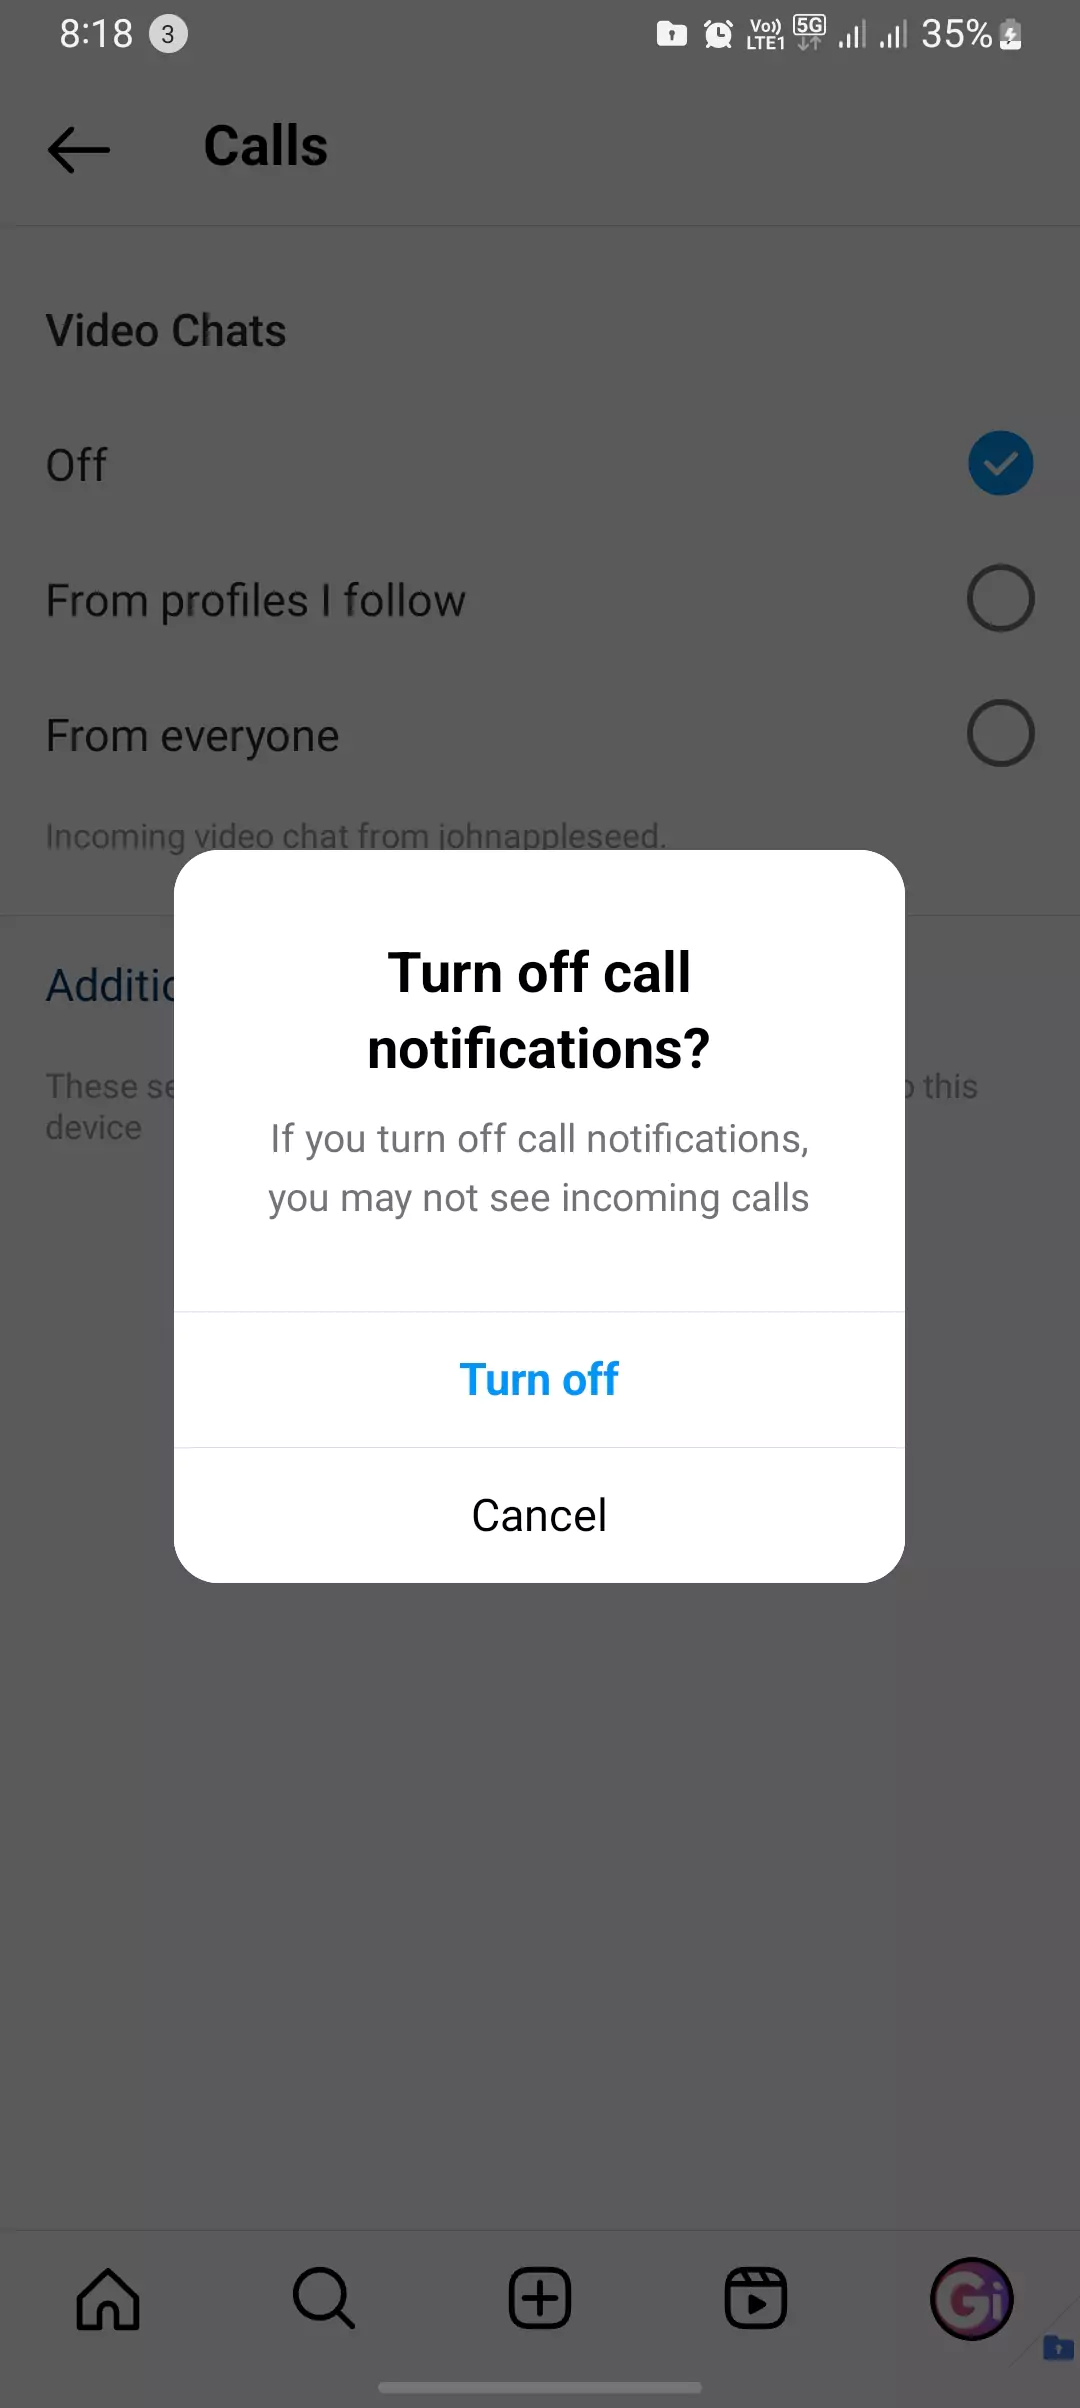 confirmation to disable calls from instagram app